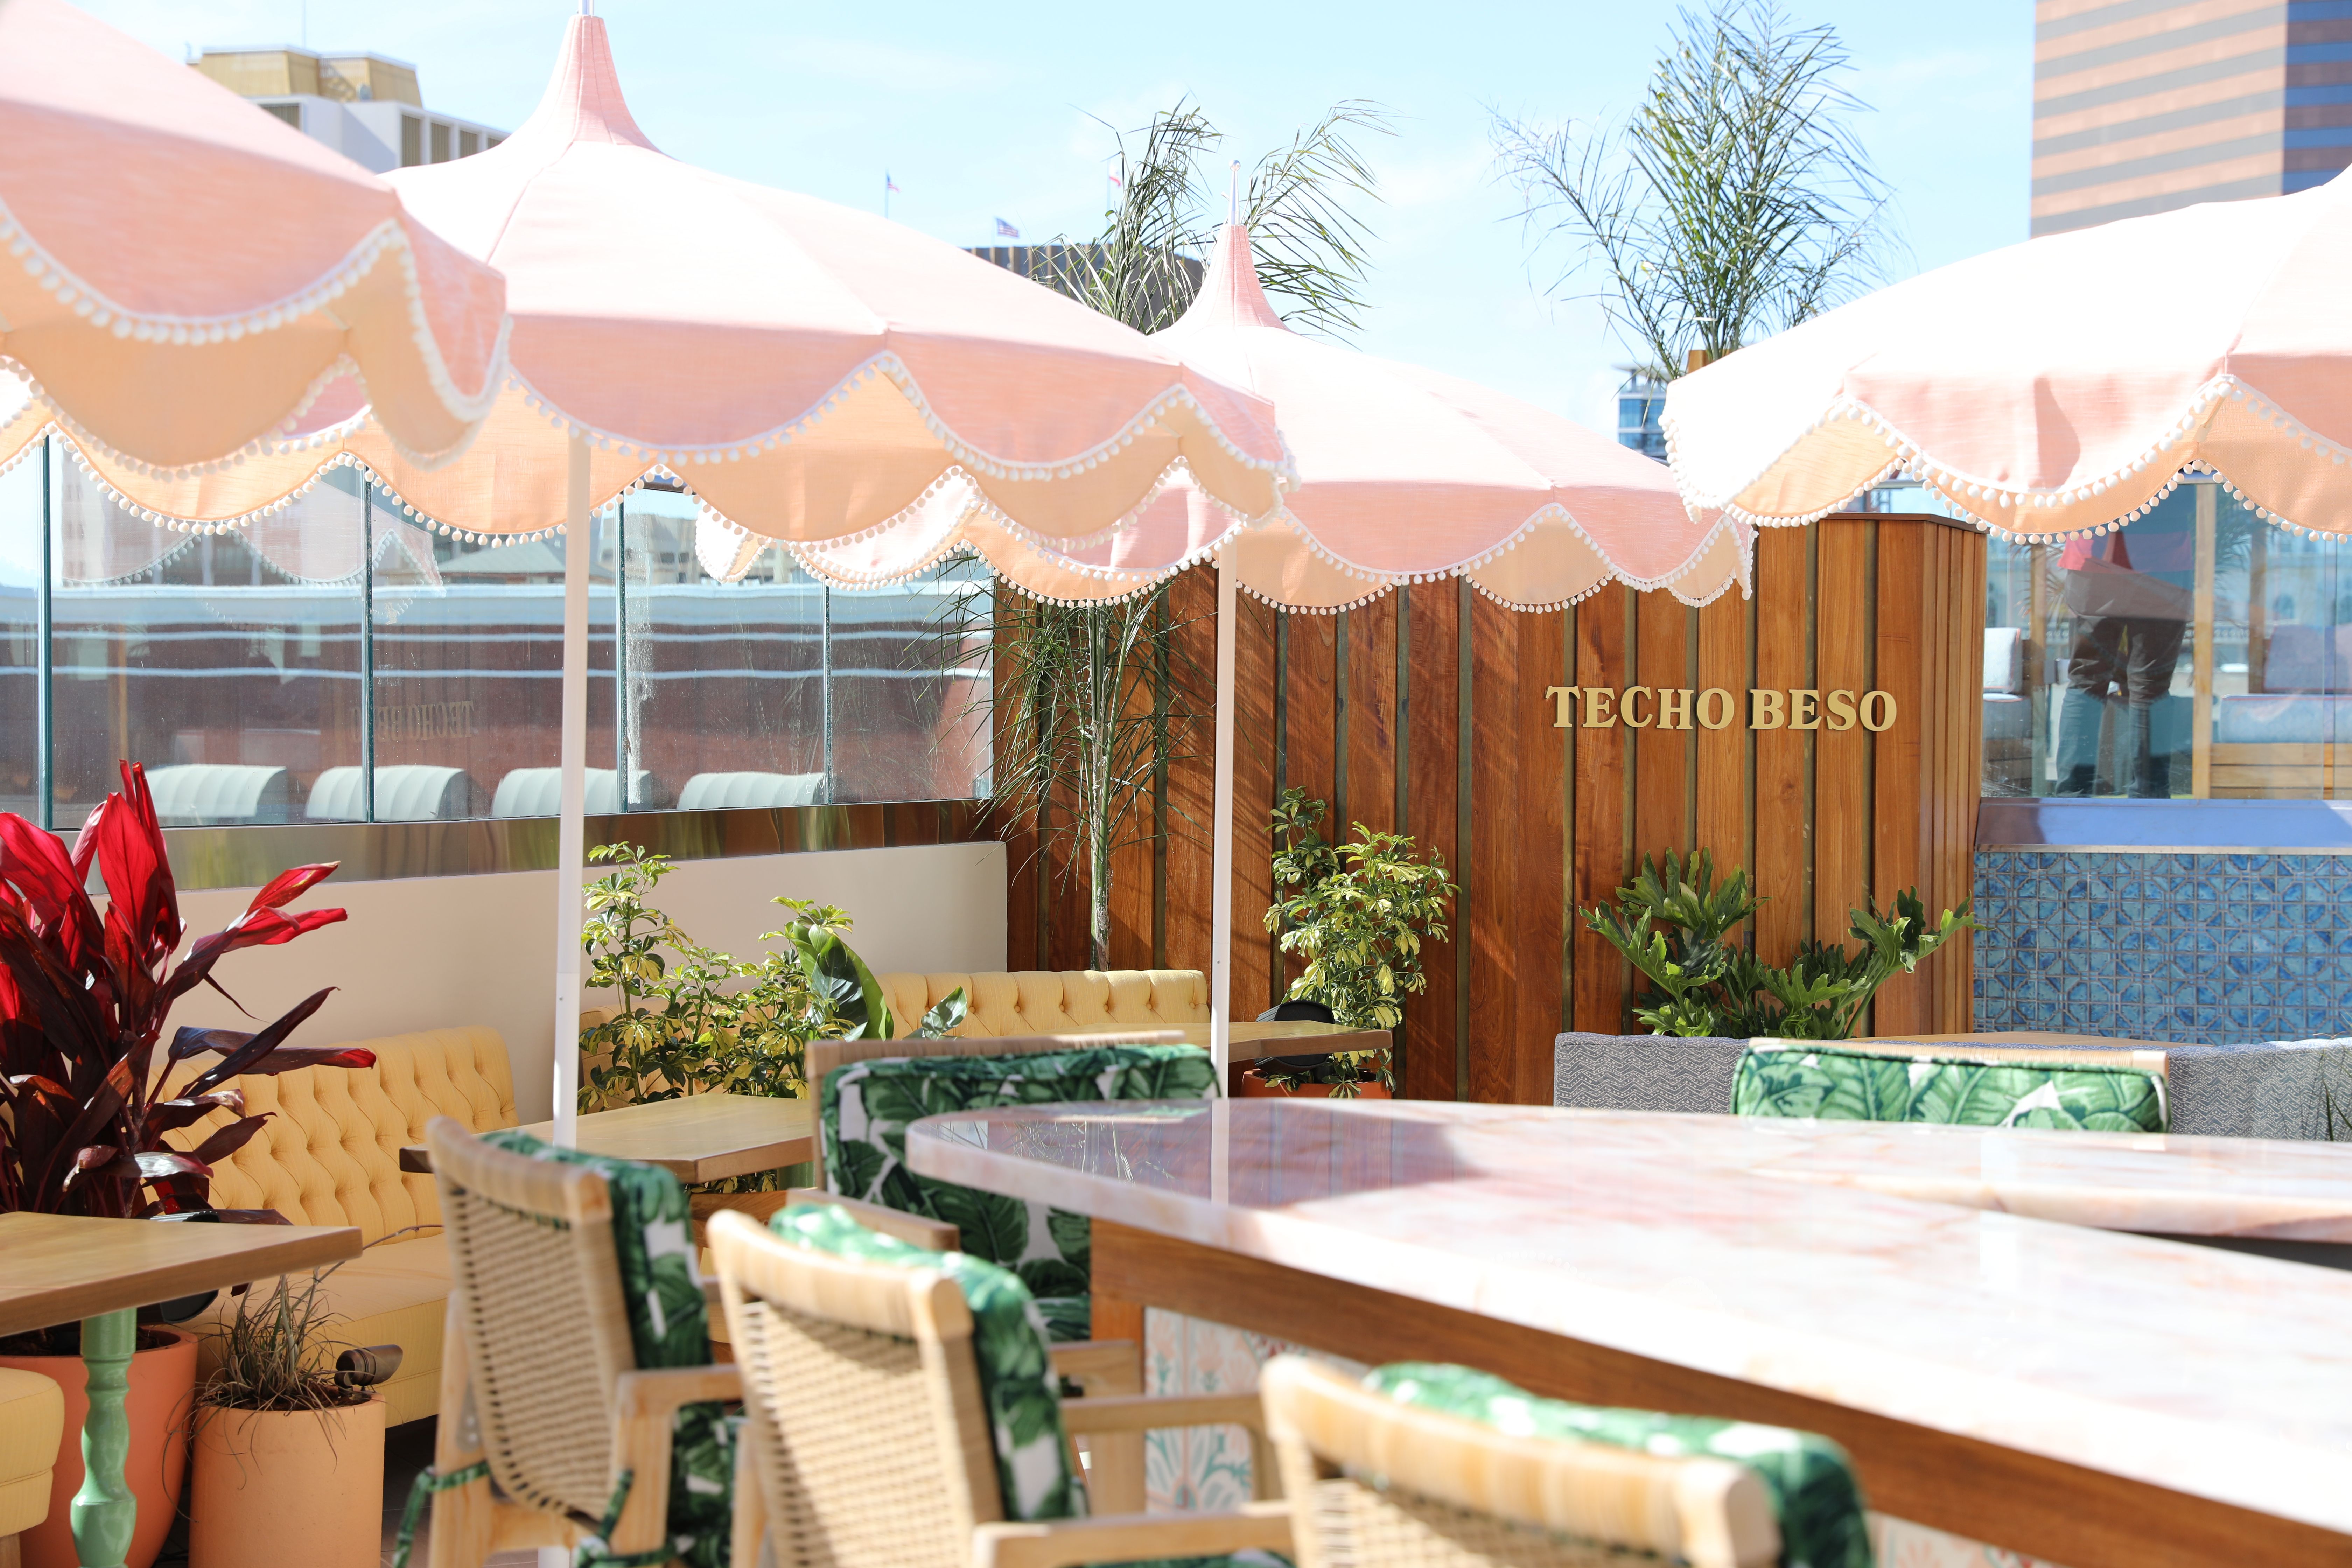 A rooftop bar with coastal decor and furniture including pink umbrellas and palm-printed chairs.